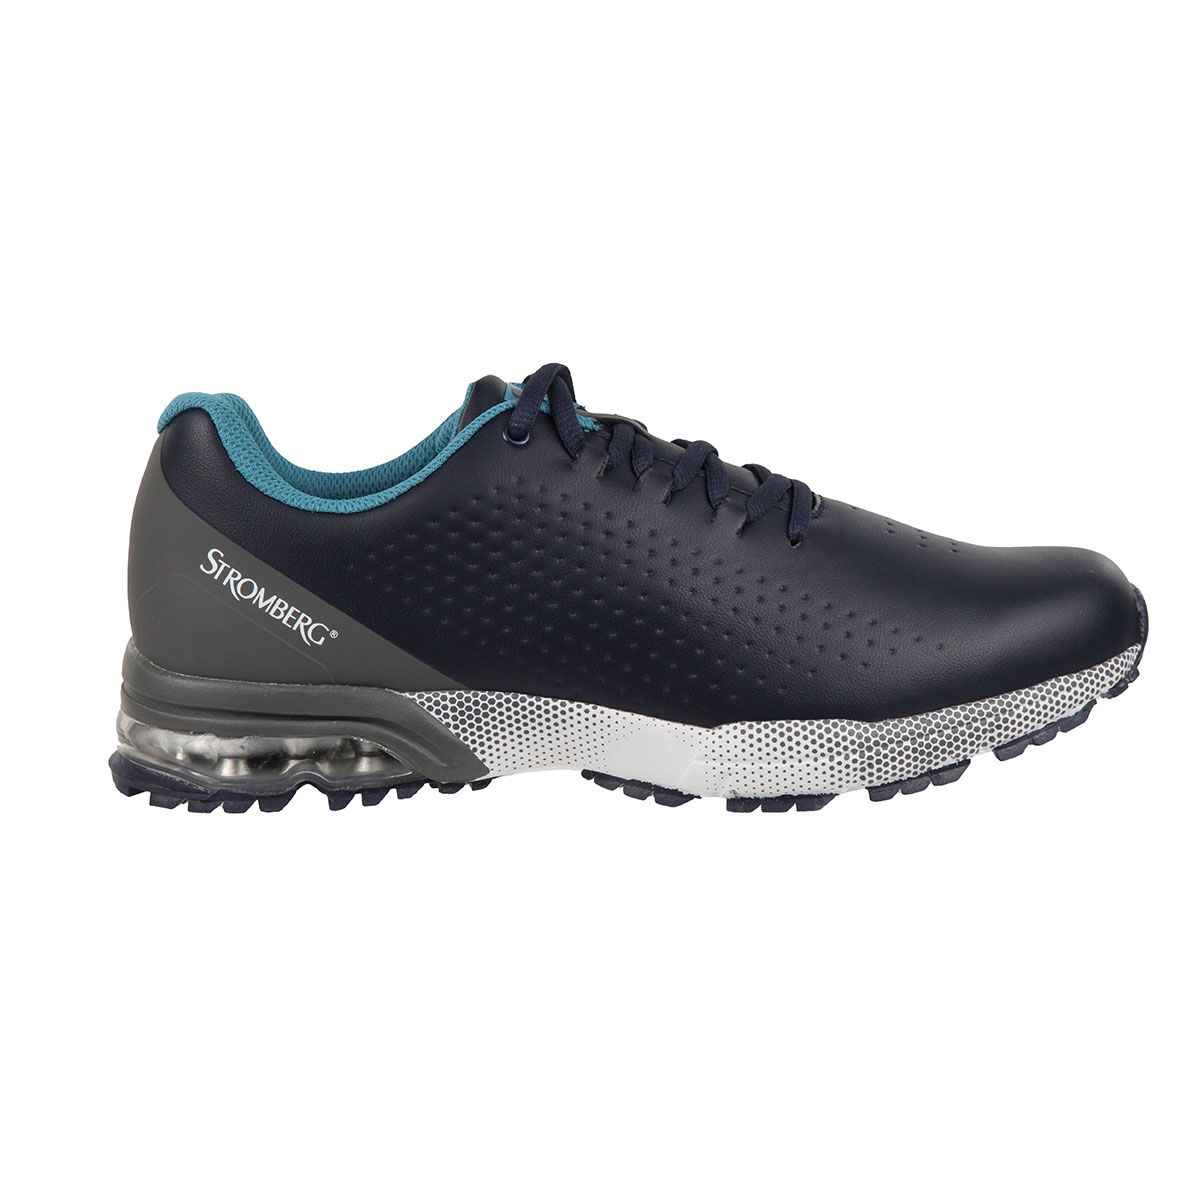 Stromberg Men's Ailsa Waterproof Spikeless Golf Shoes, Mens, Navy/blue, 8 | American Golf - Father's Day Gift von Stromberg